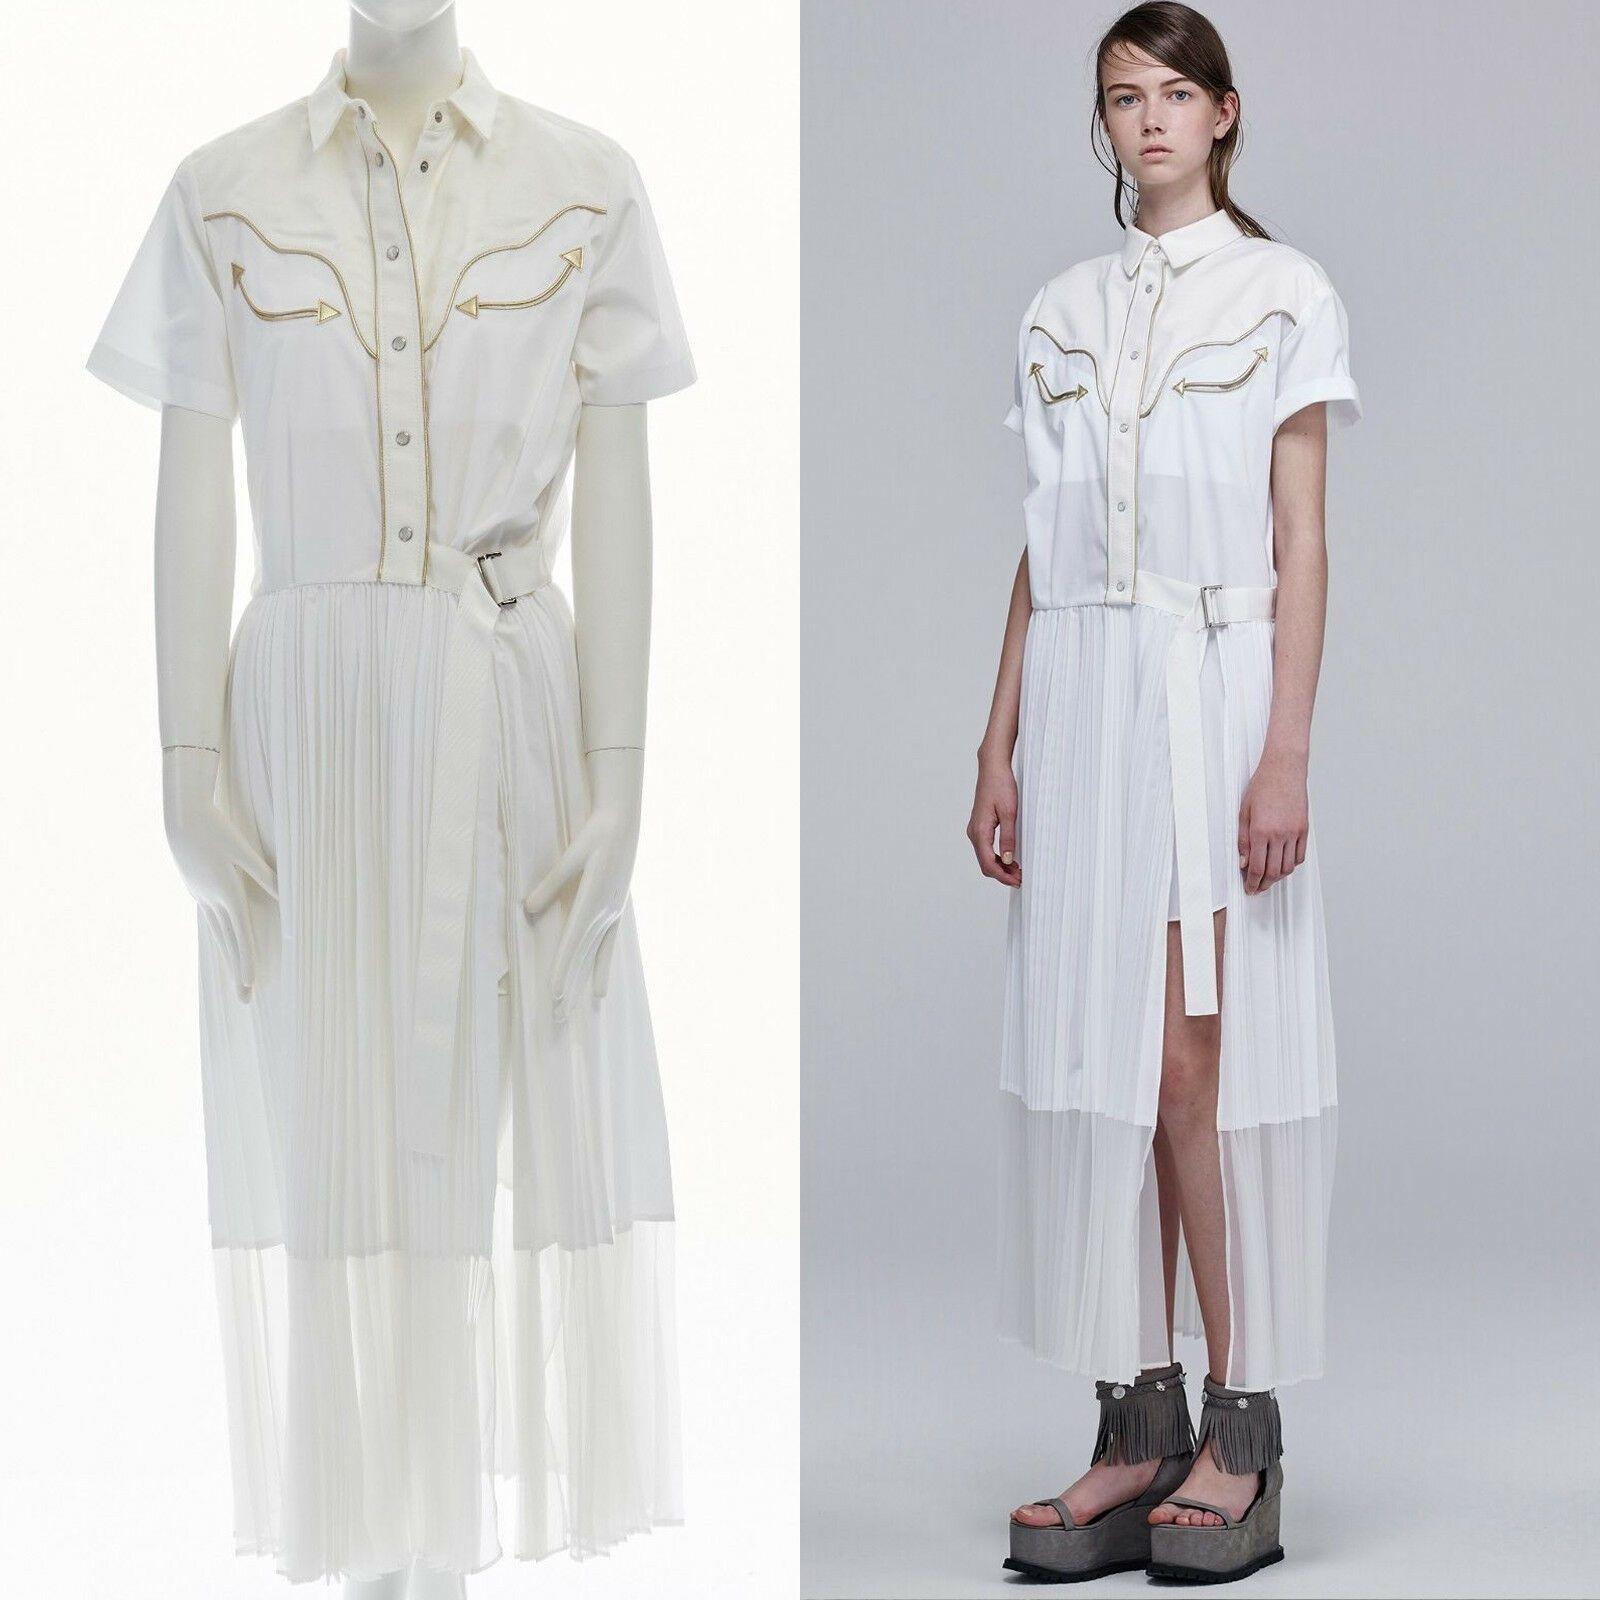 new SACAI Resort 2016 white star western shirt pleated belted cotton dress JP2 M
SACAI BY CHITOSE ABE
AS SEEN ON: RESORT 2016 LOOKBOOK
COTTON, LINEN, POLYESTER, POLYURETHANE. 
WHITE COTTON. 
WESTERN INSPIRED GOLD LEATHER BONDING ALONG PLACKET AND